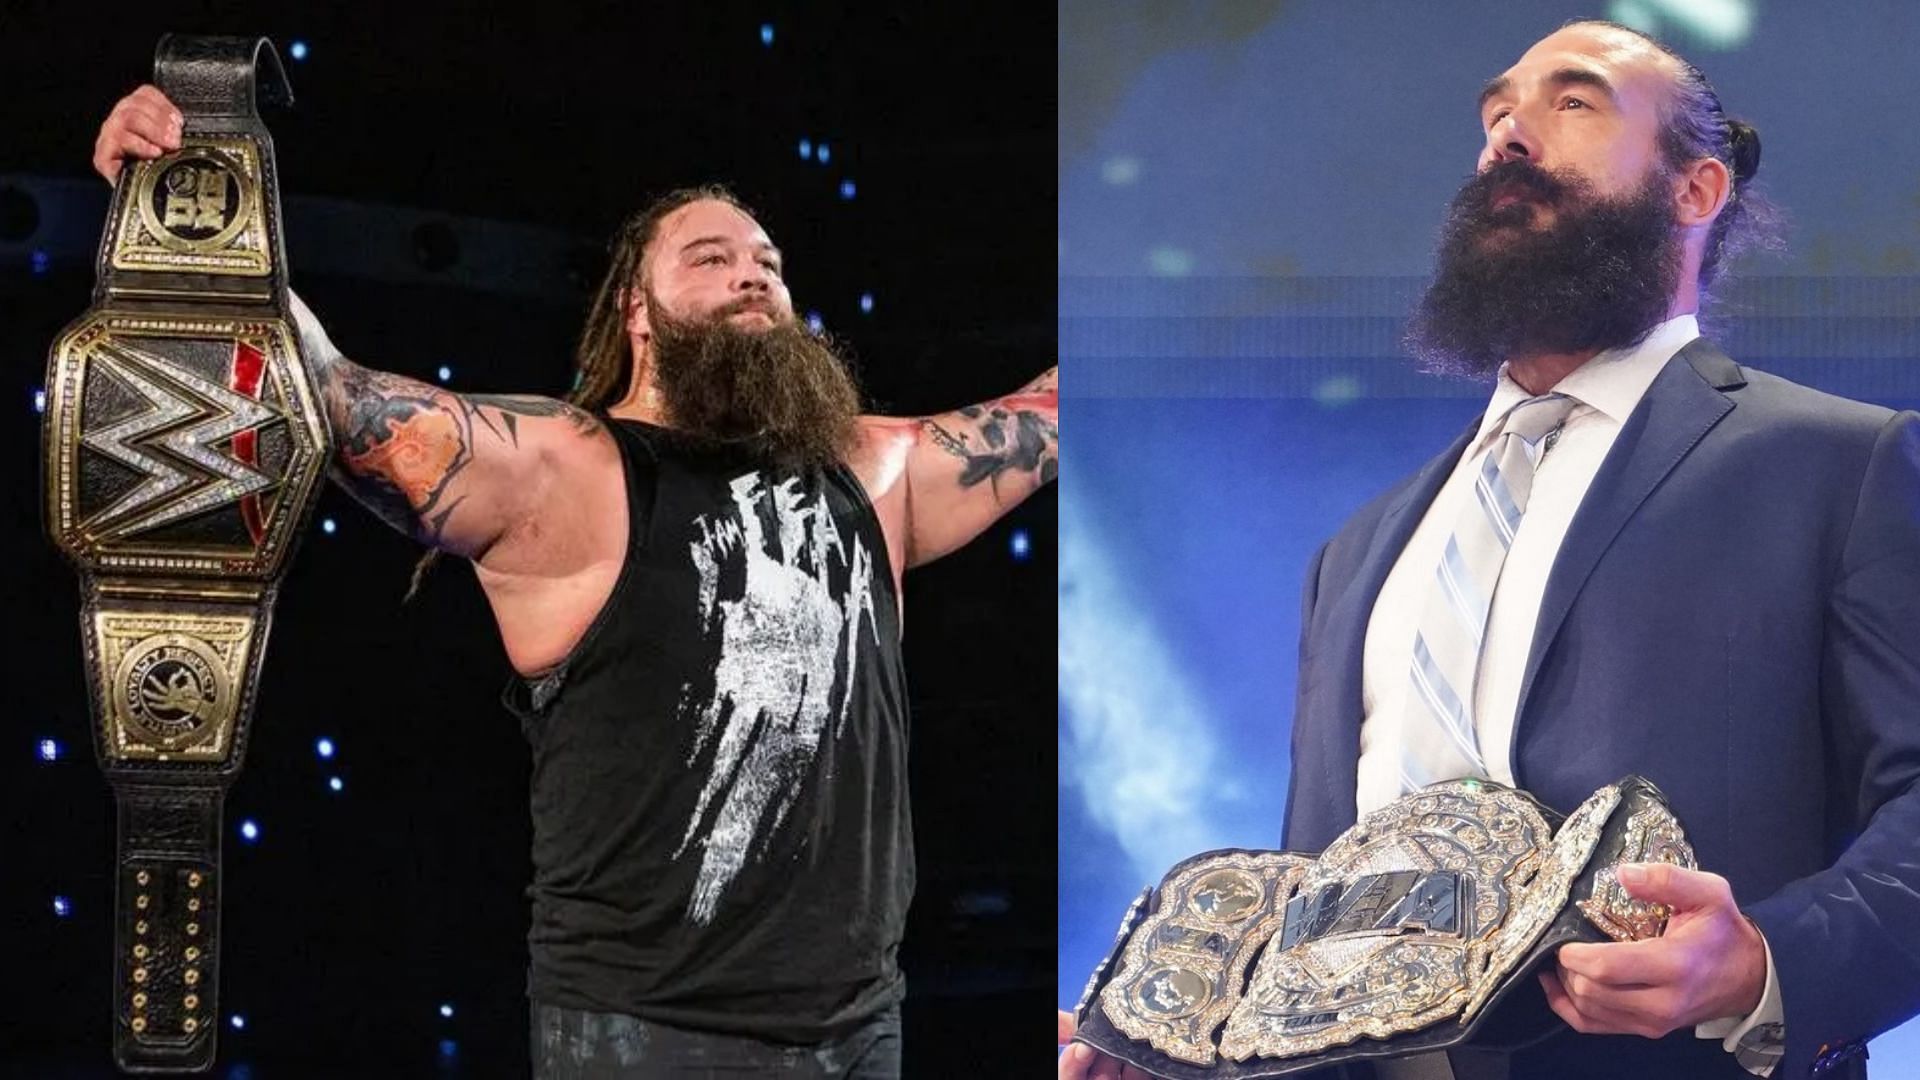 Bray Wyatt and Brodie Lee are among the most beloved wrestlers